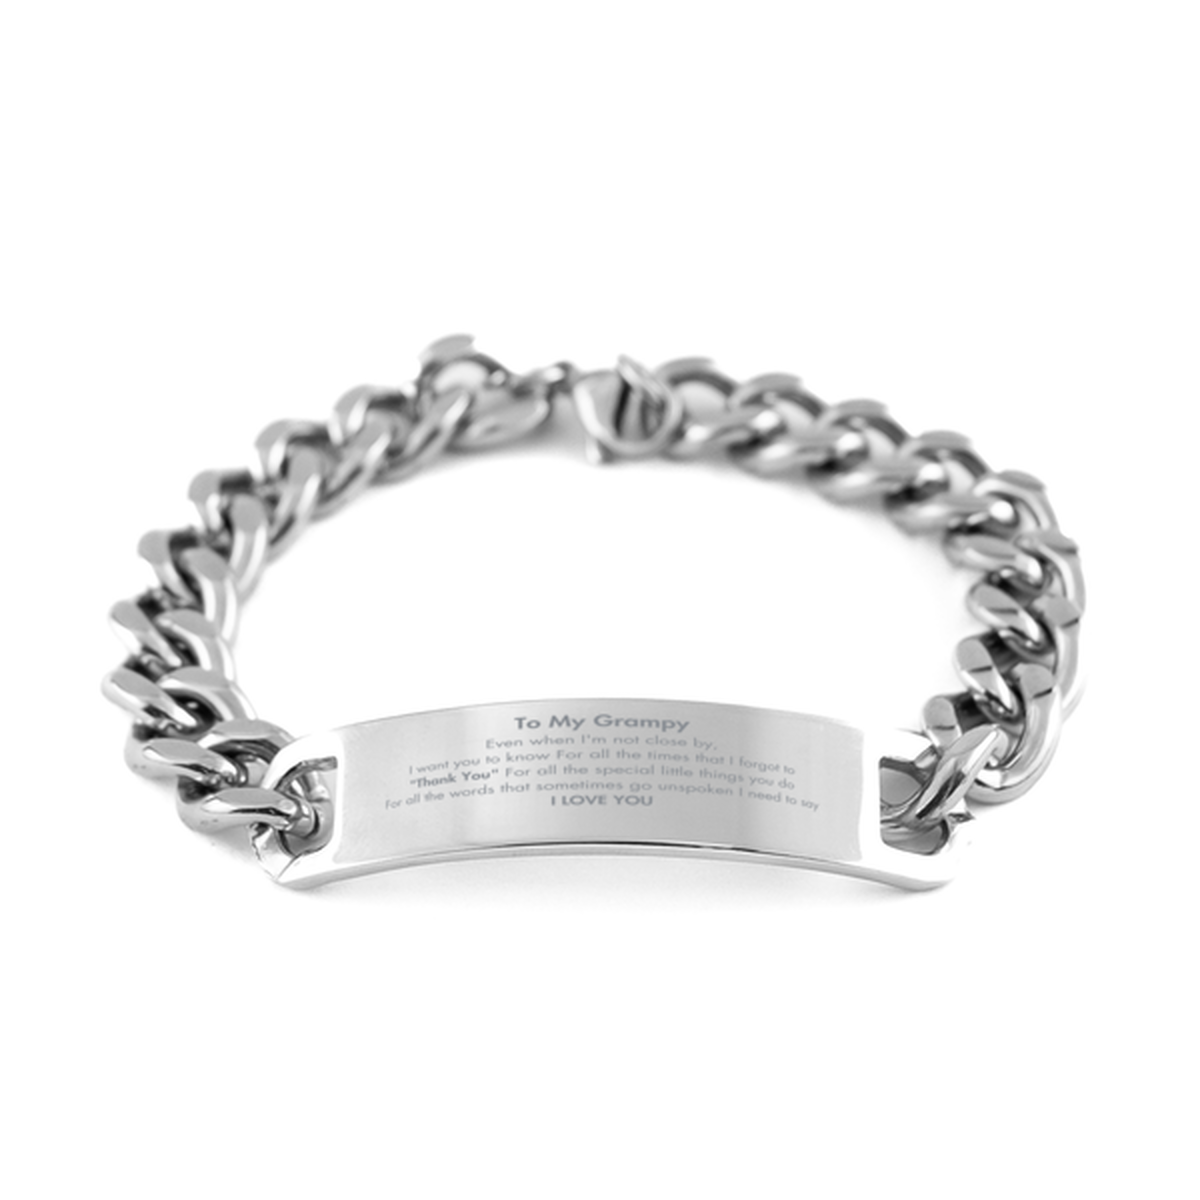 Thank You Gifts for Grampy, Keepsake Cuban Chain Stainless Steel Bracelet Gifts for Grampy Birthday Mother's day Father's Day Grampy For all the words That sometimes go unspoken I need to say I LOVE YOU